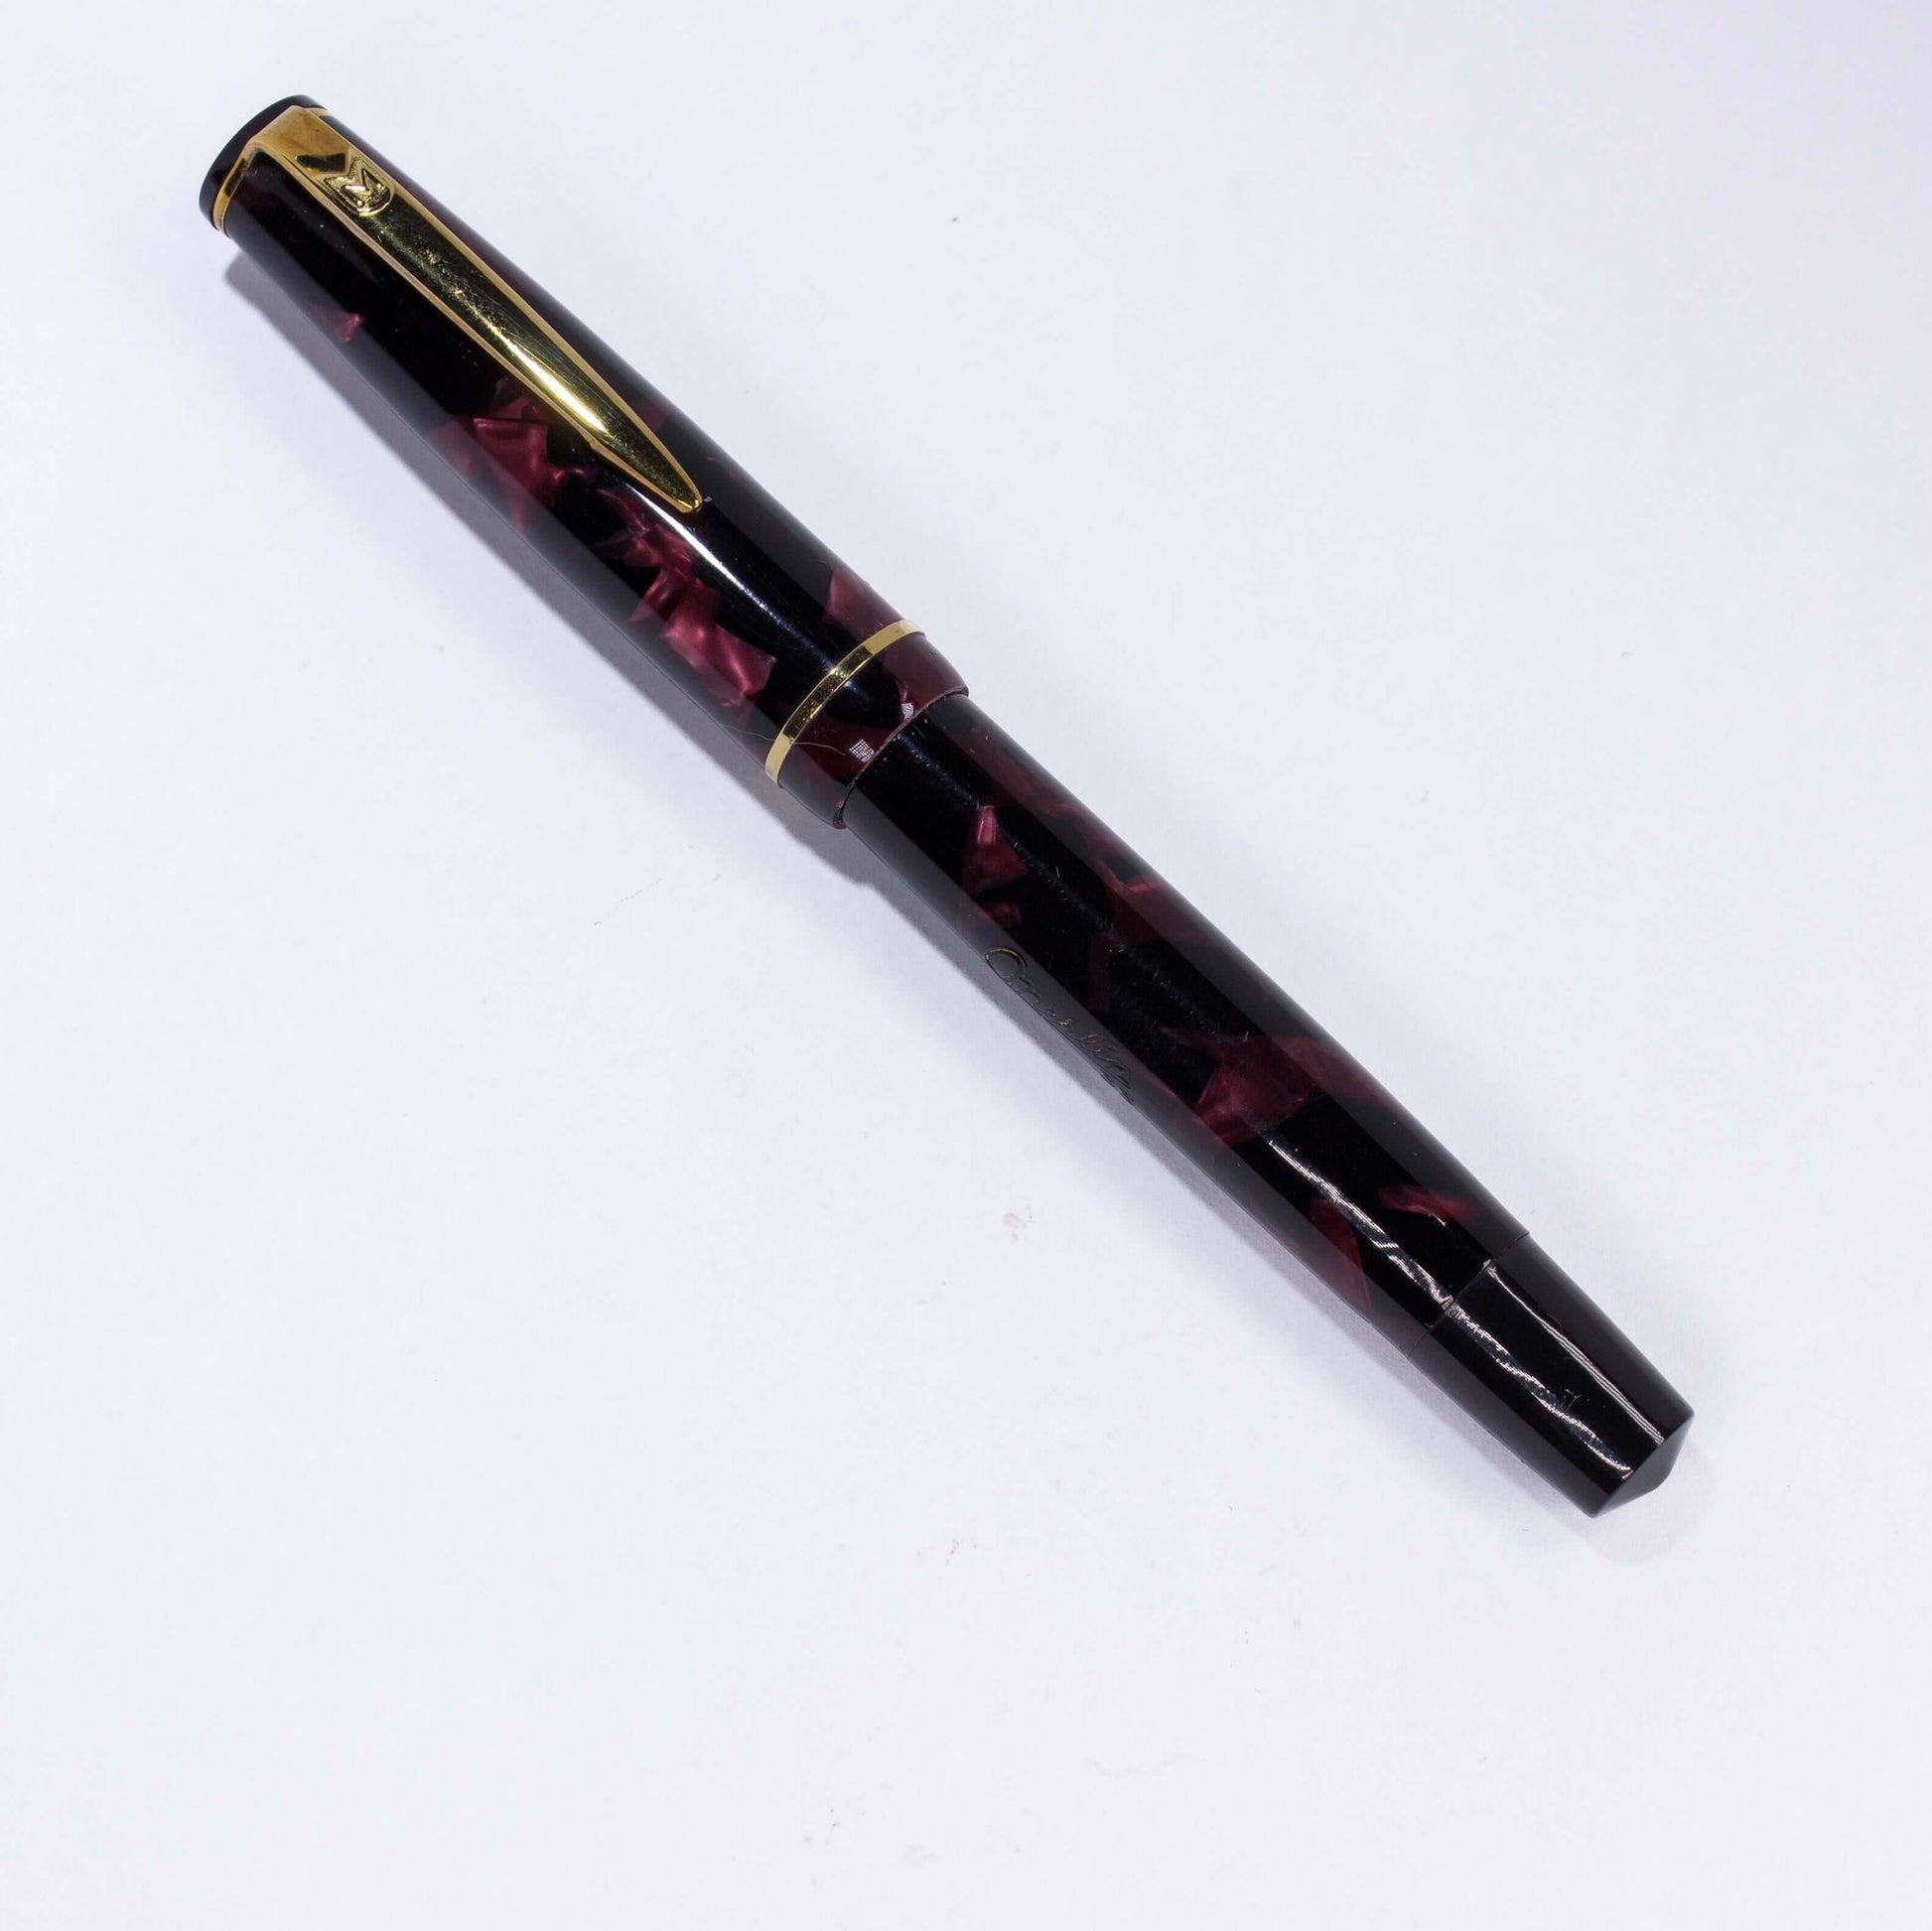 Merlin 33 Fountain Pen, Red Marble, Gold Trim 14K Merlin Nib, Flexible, Button Filler with New Sac Installed Type: Vintage Button Filler Fountain Pen Product Name: Merlin Manufacture Year: 1950s, made in Europe Length: 4 3/4 Filling System: Button Filler,